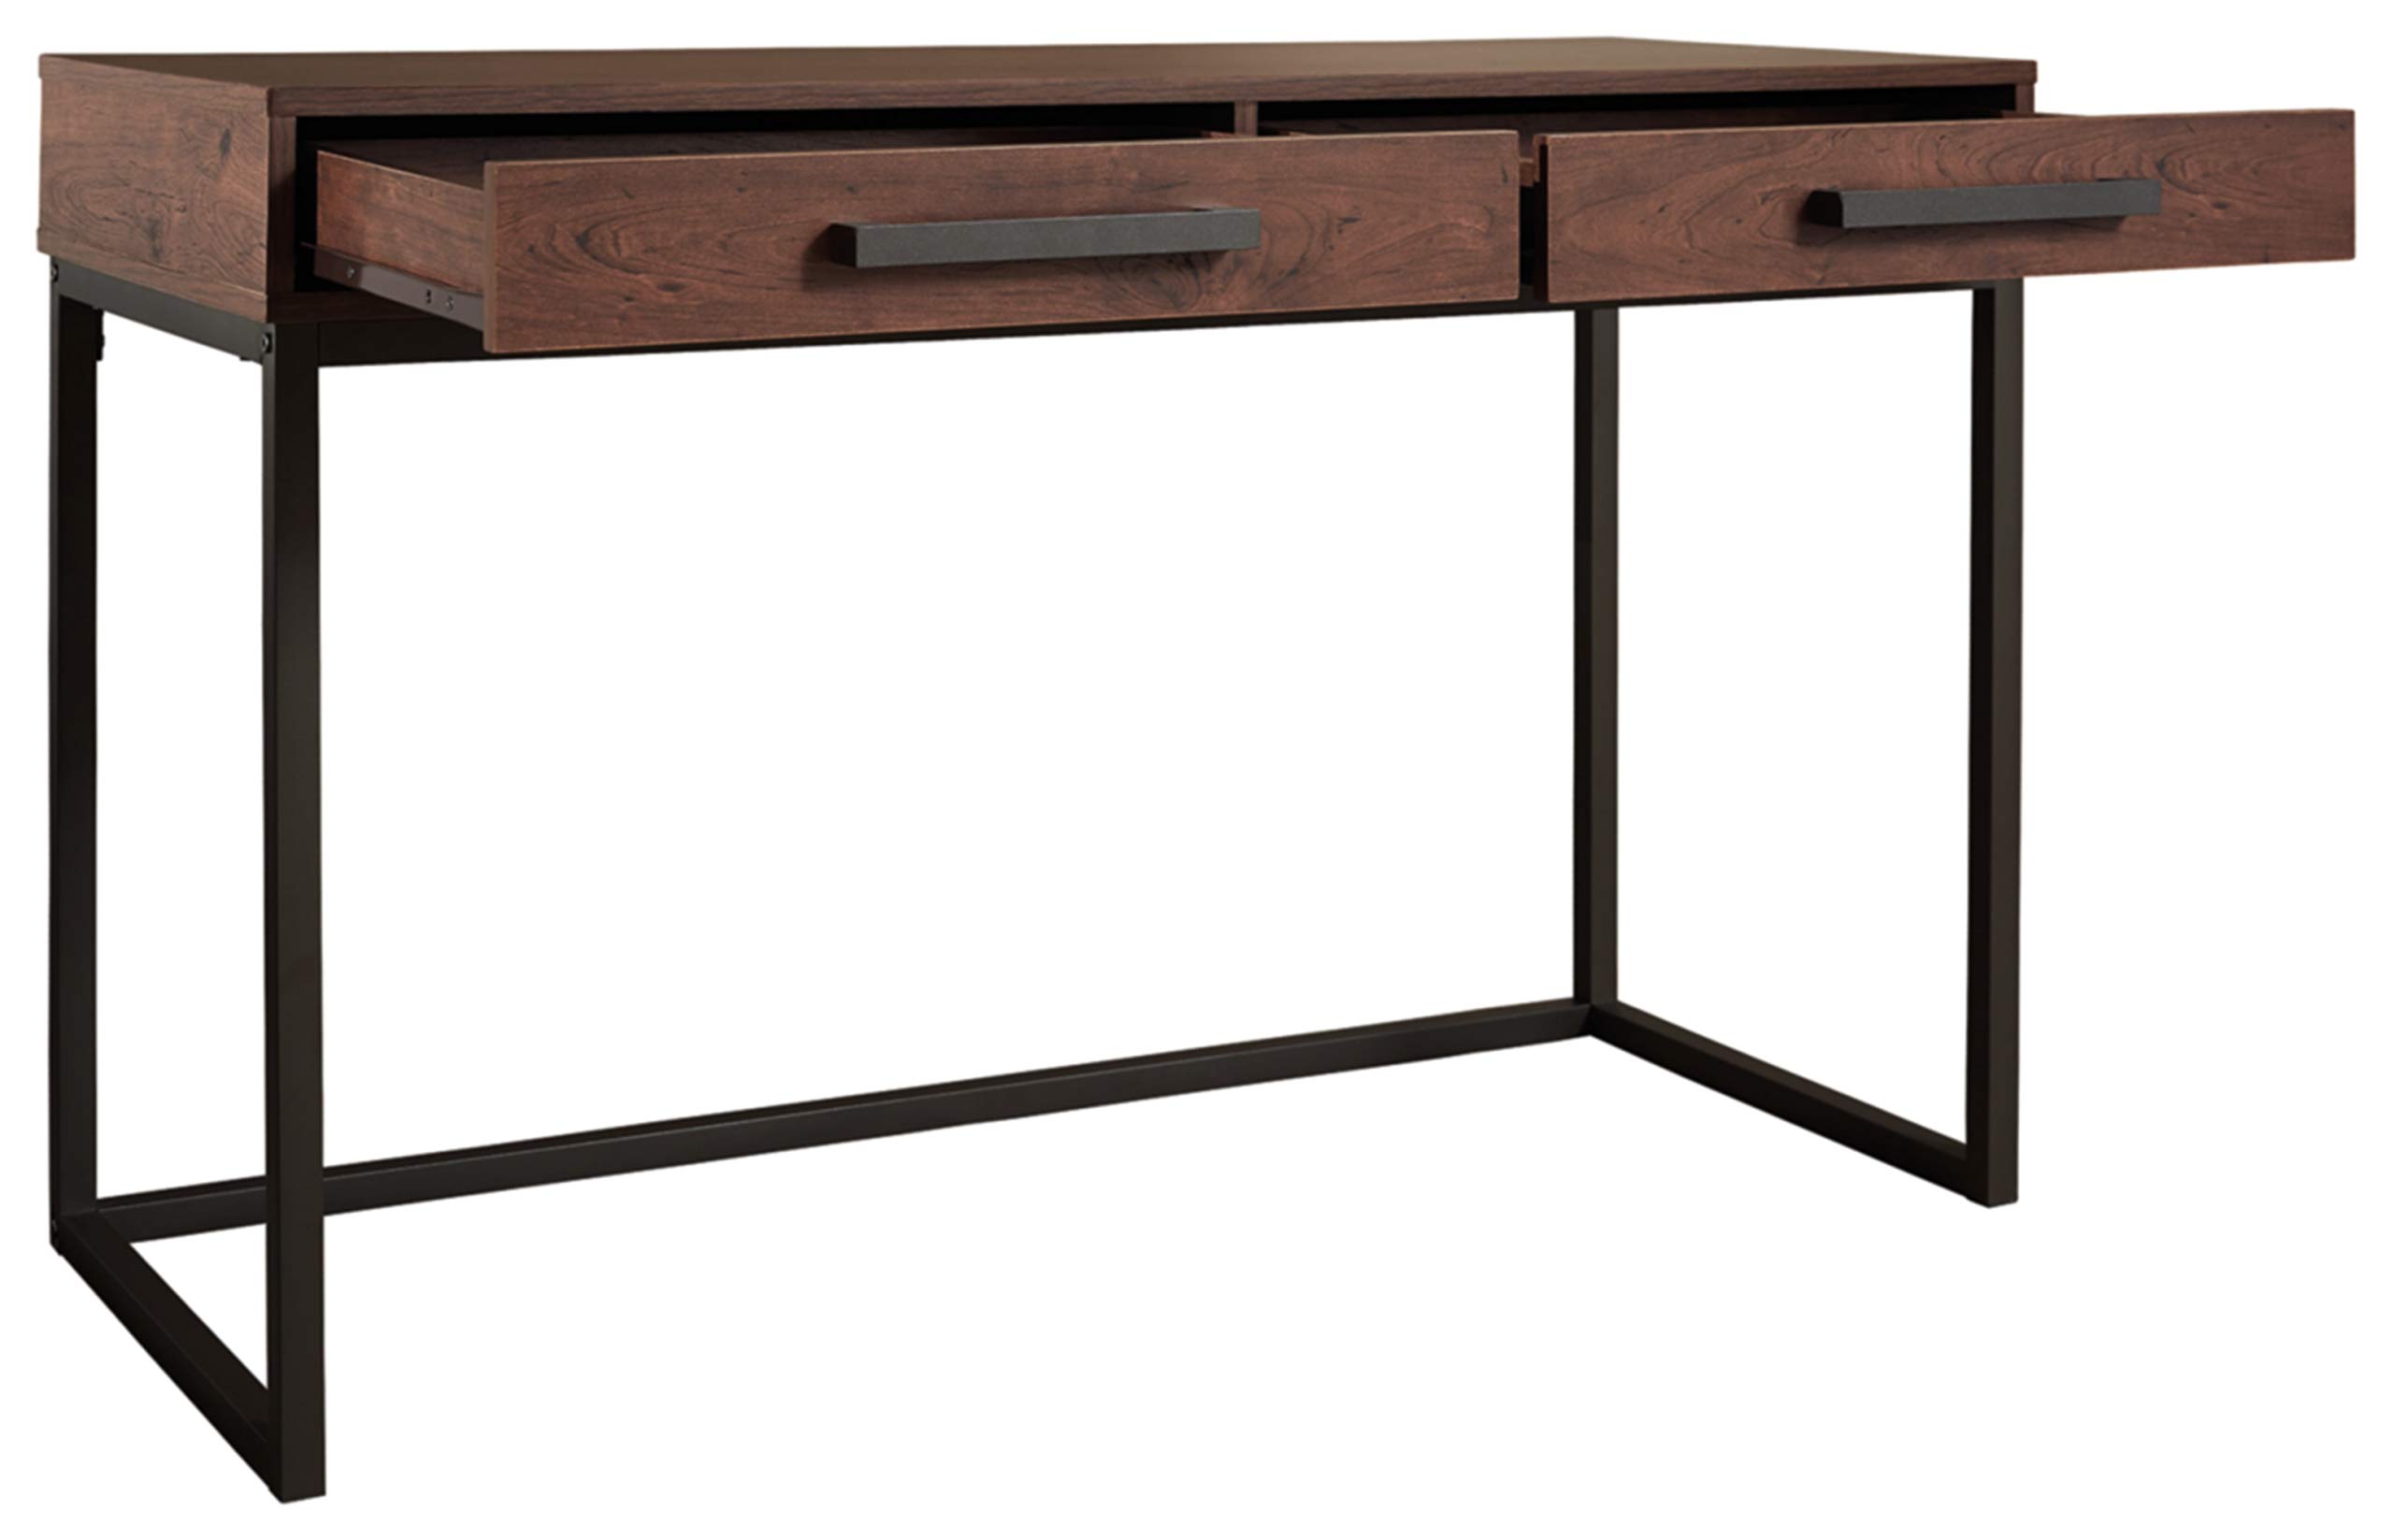 Signature Design by Ashley Horatio Urban Industrial 48" Home Office Desk with 2 Drawers, Brown